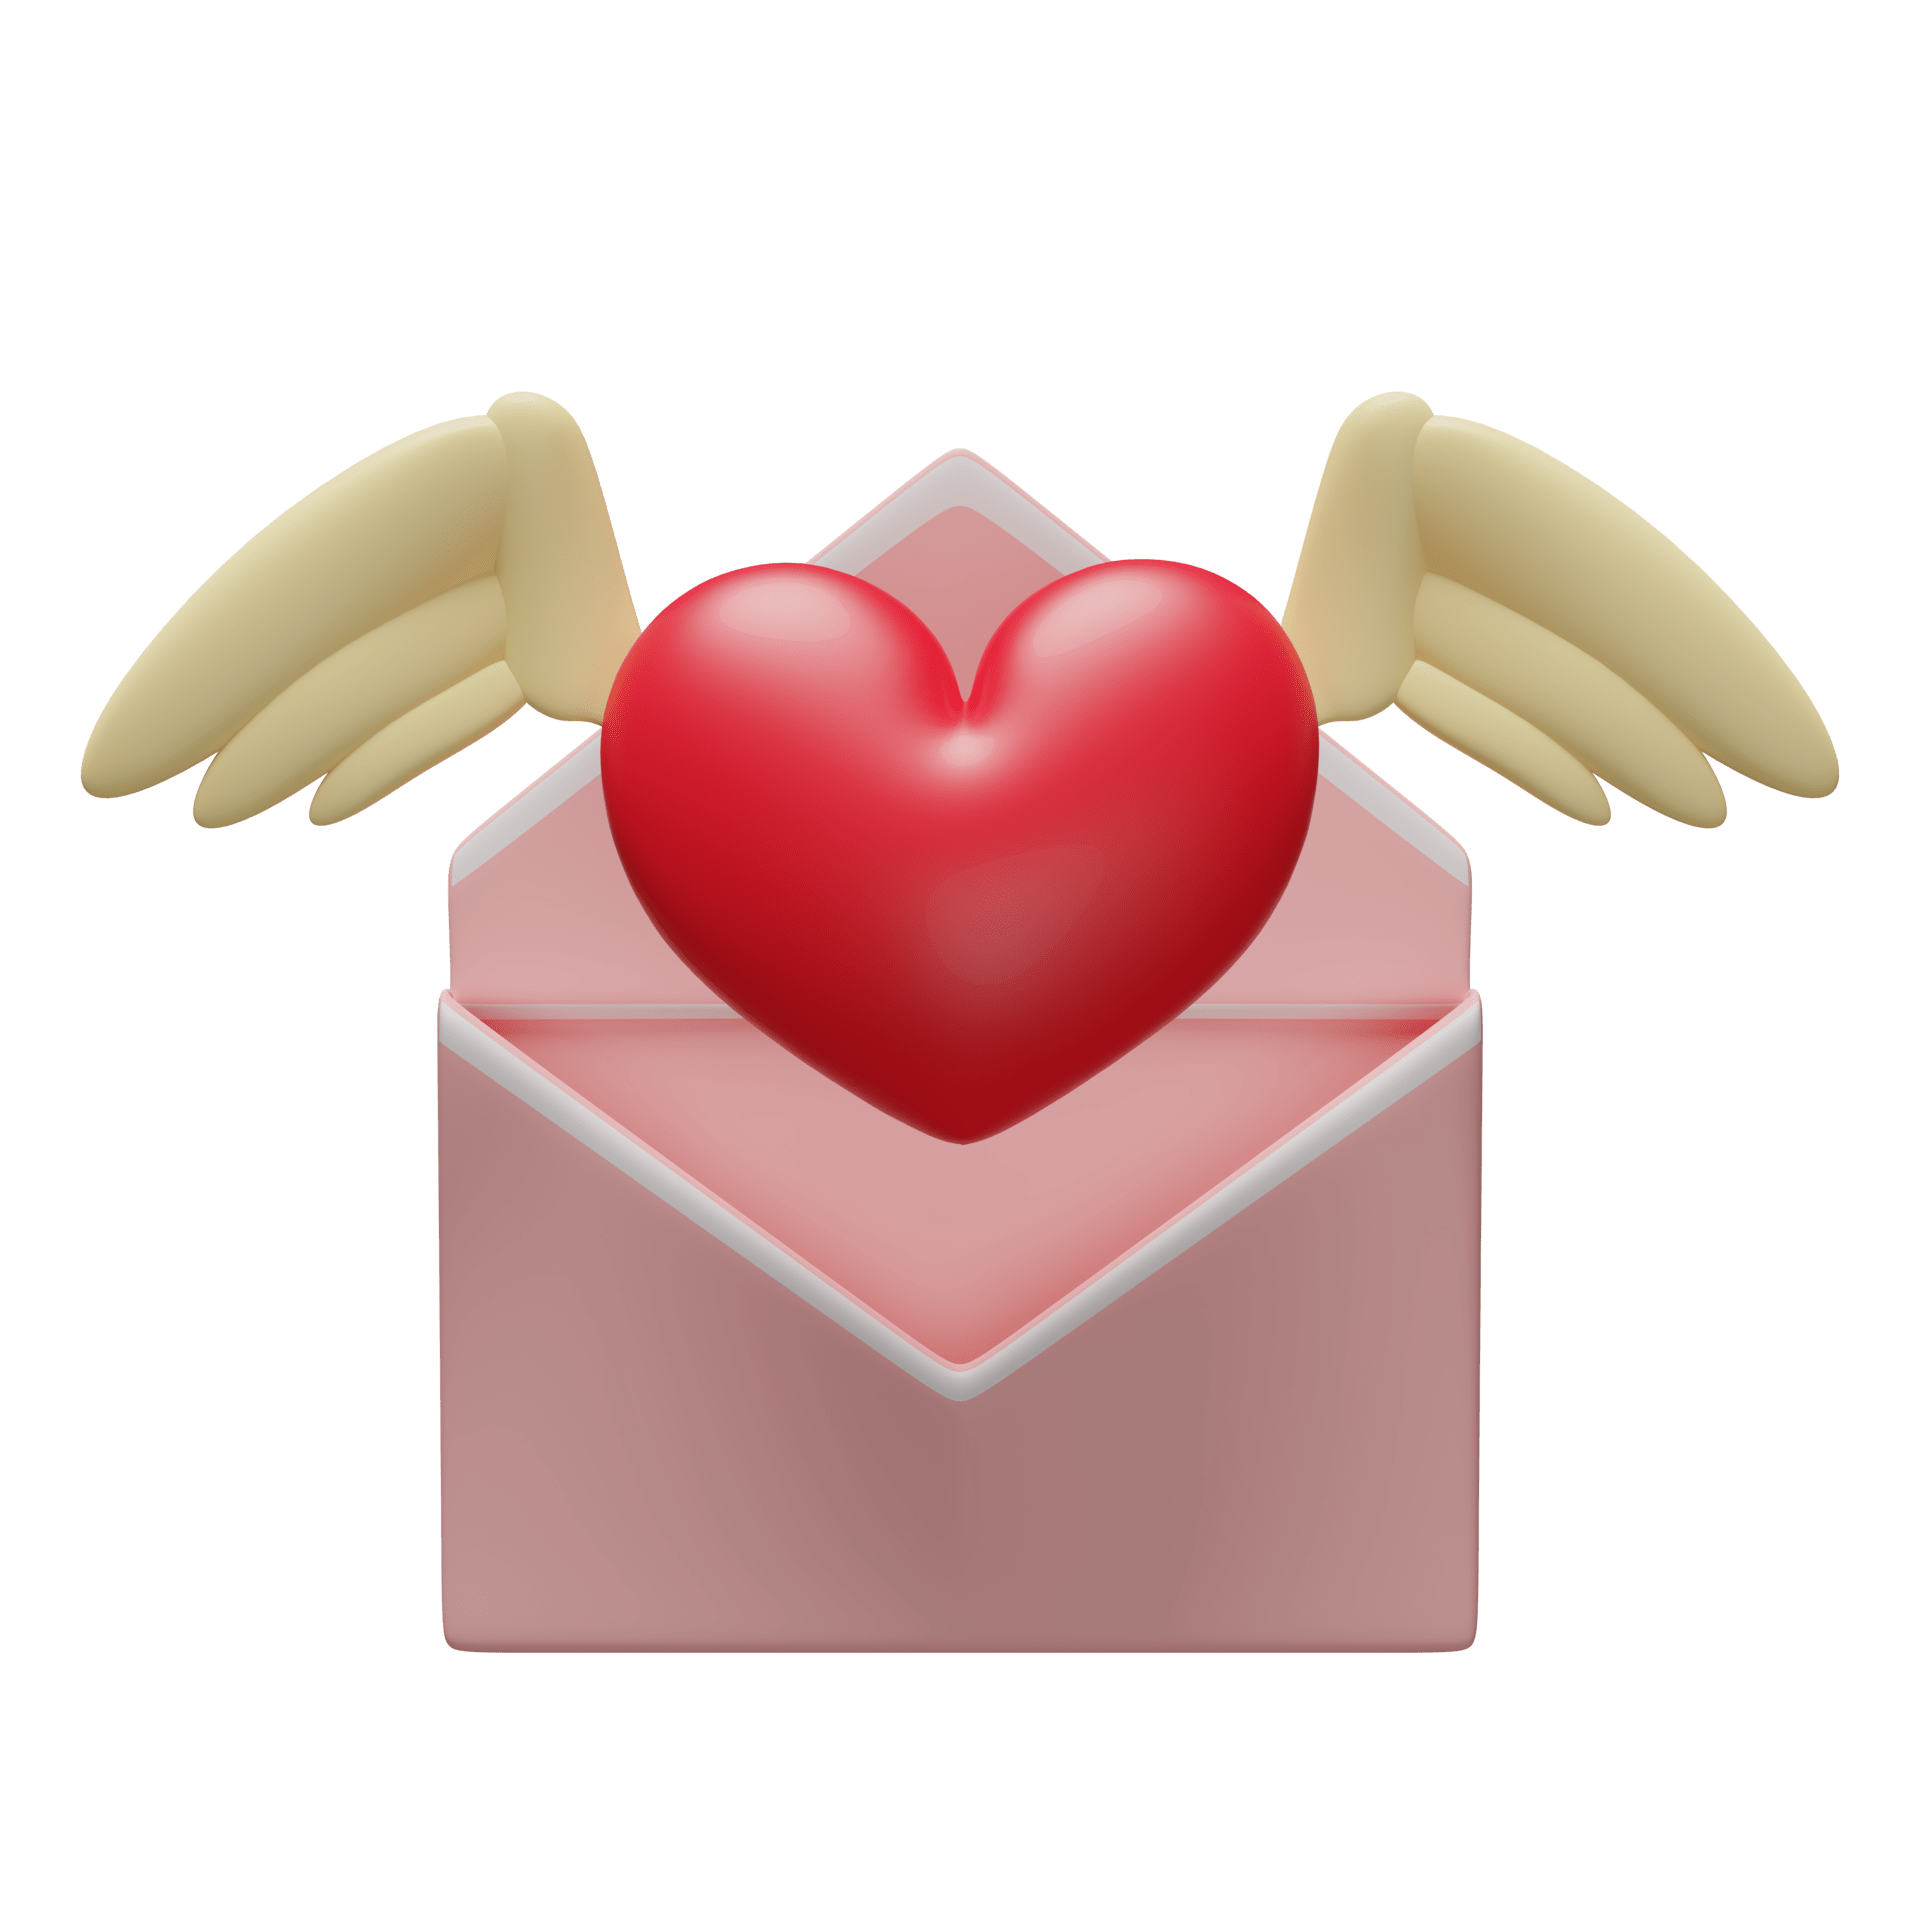 red-heart-with-wings-flying-envelope-isolated-notify-newsletter-online-incoming-email-health-love-or-world-heart-day-valentine-s-day-concept-3d-illustration-or-3d-render-png-min.png